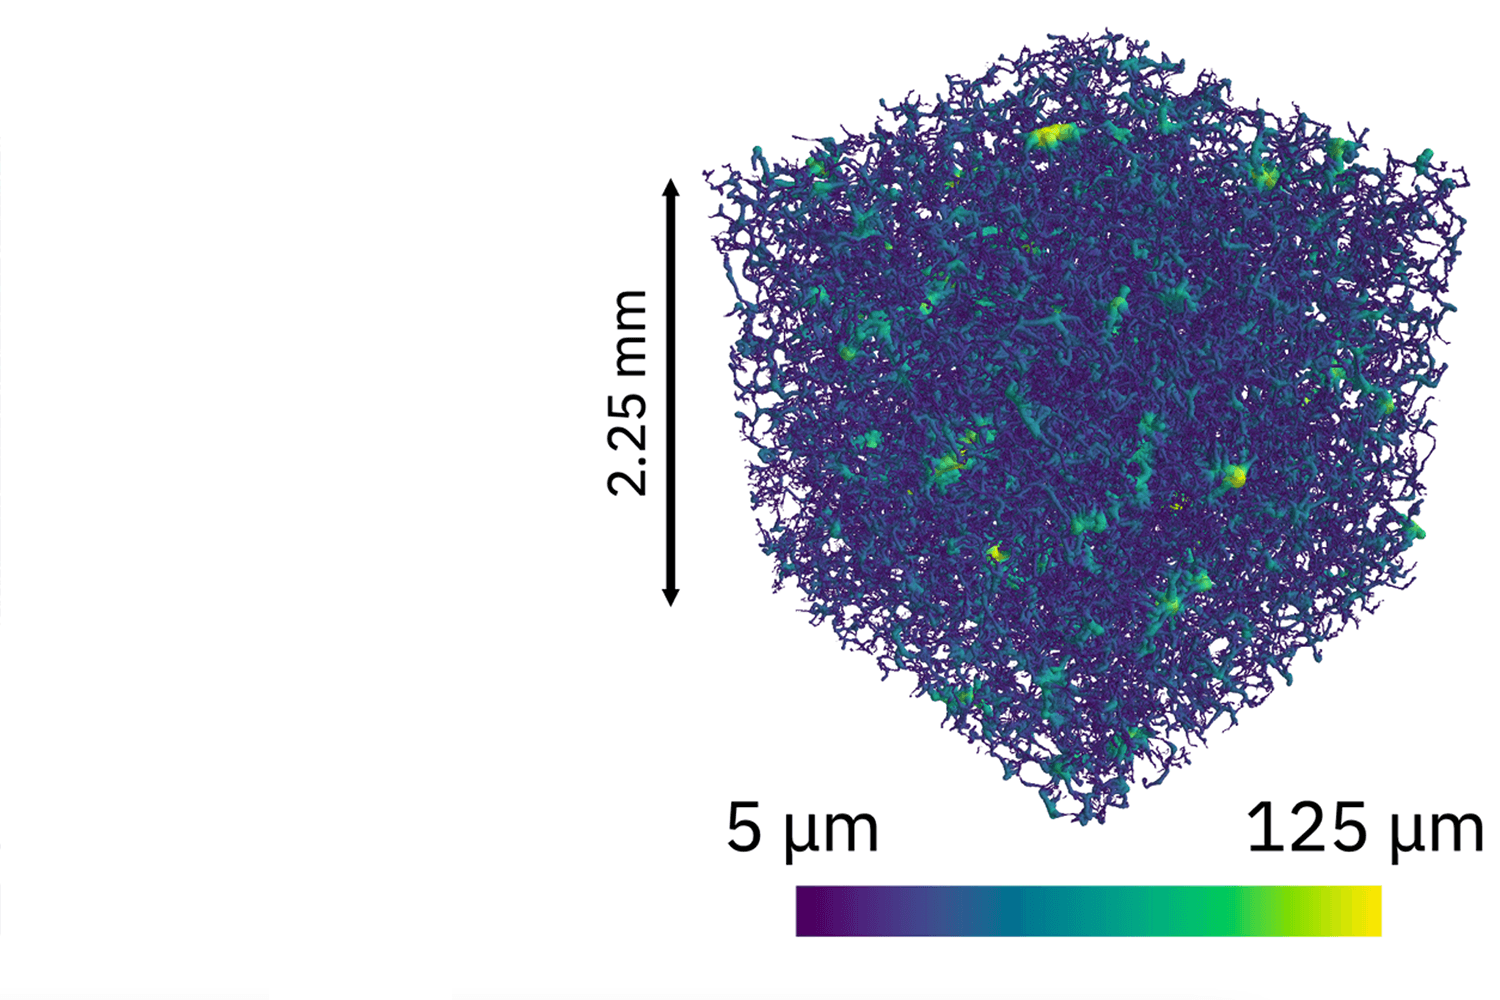 High-accuracy capillary network representation created from X-ray micro-CT image cube by using our centerline algorithm.